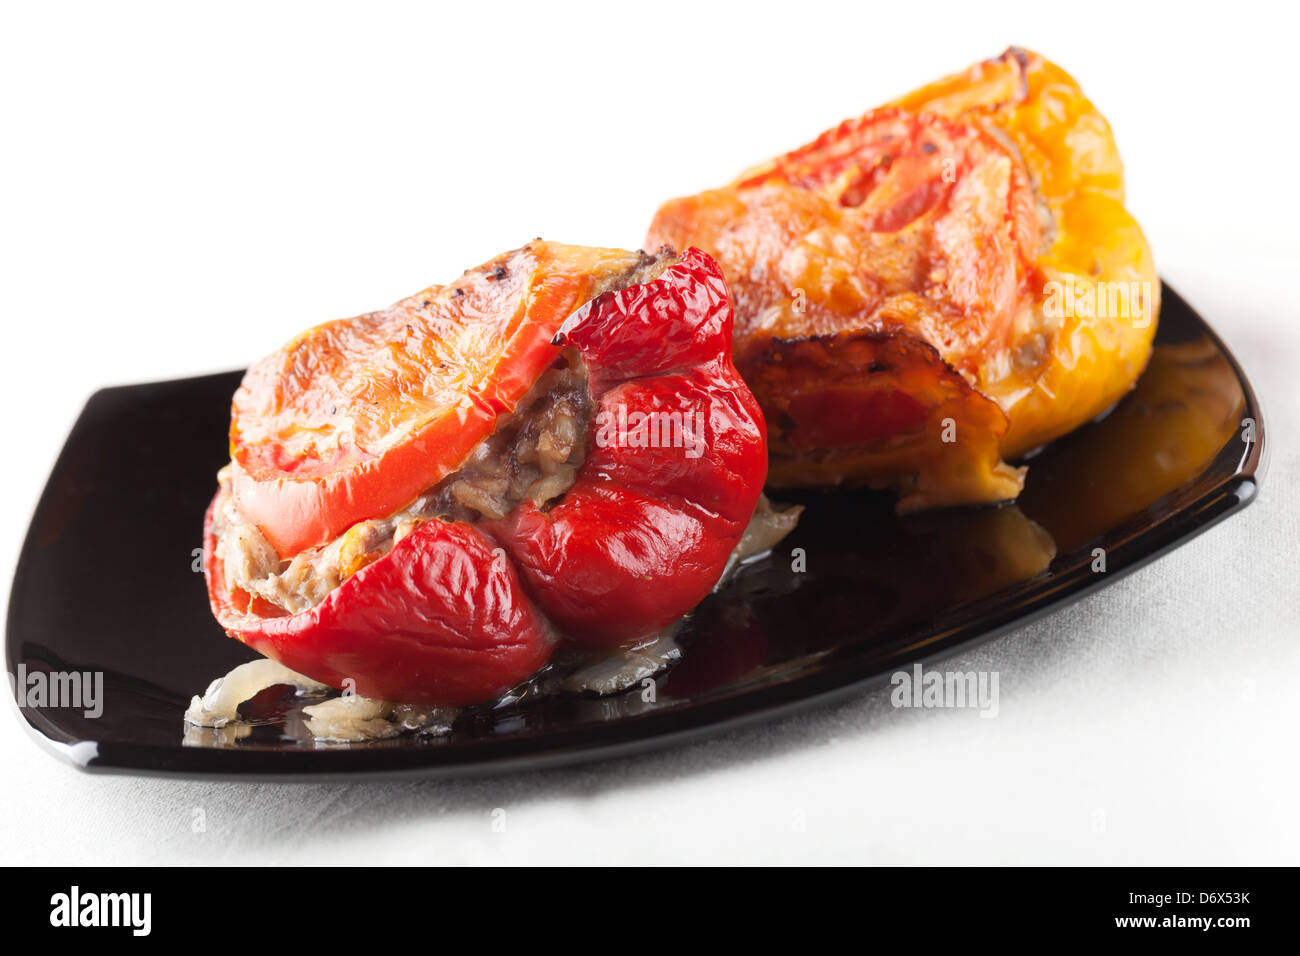 Stuffed bell peppers with chopped meat, cheese and tomato on black plate Stock Photo